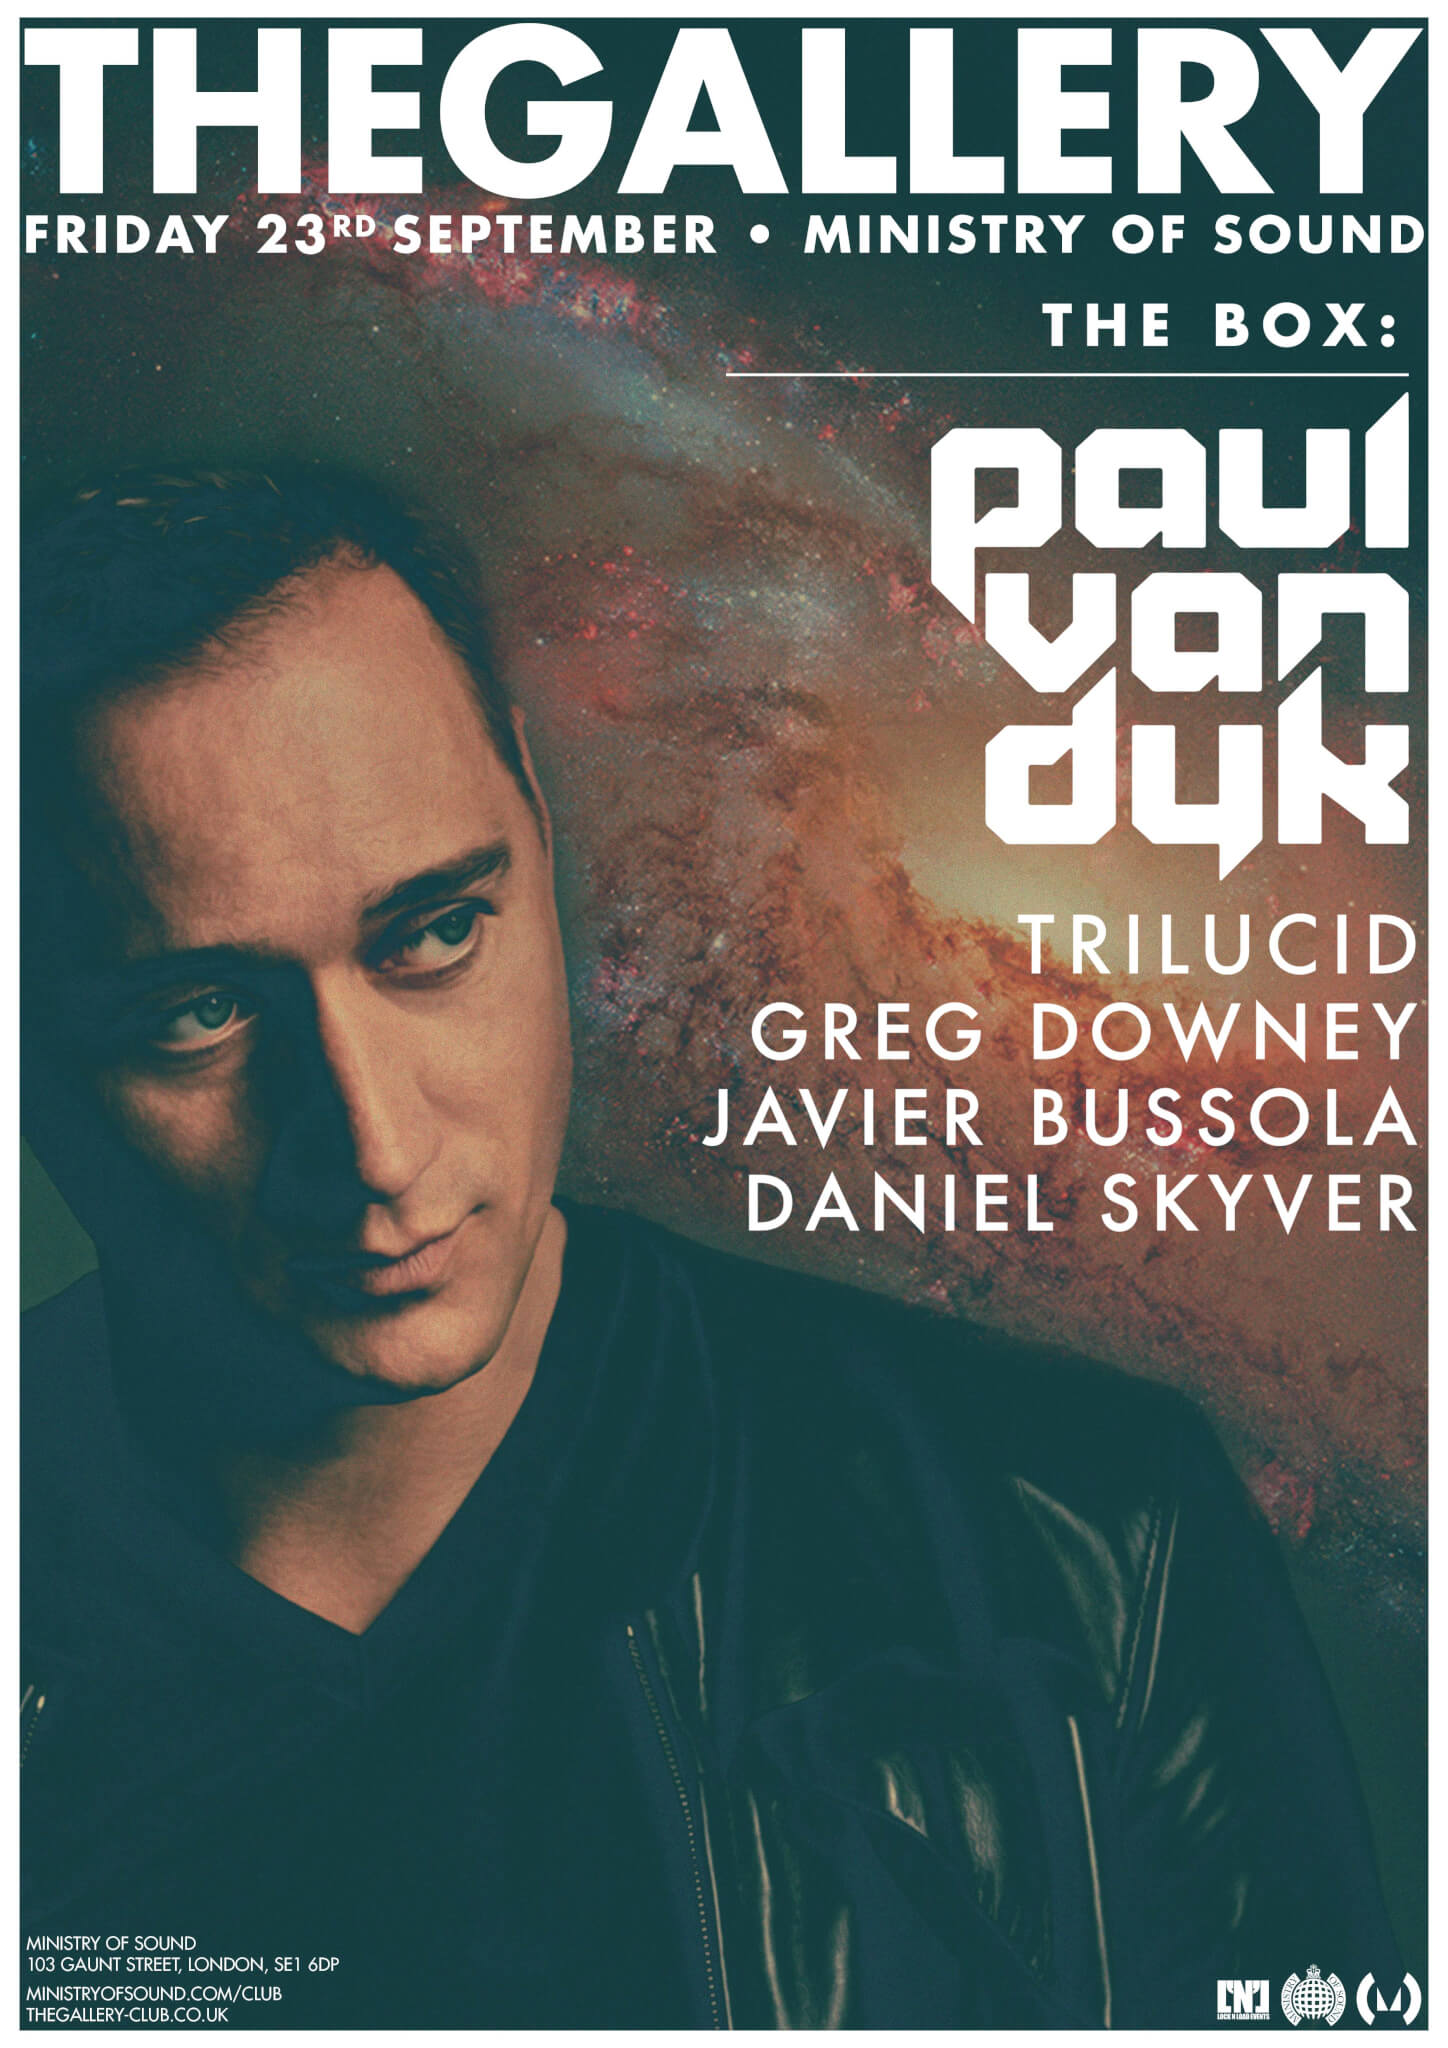 Paul van Dyk at The Gallery, Ministry of Sound, London, UK on 23rd of September 2016